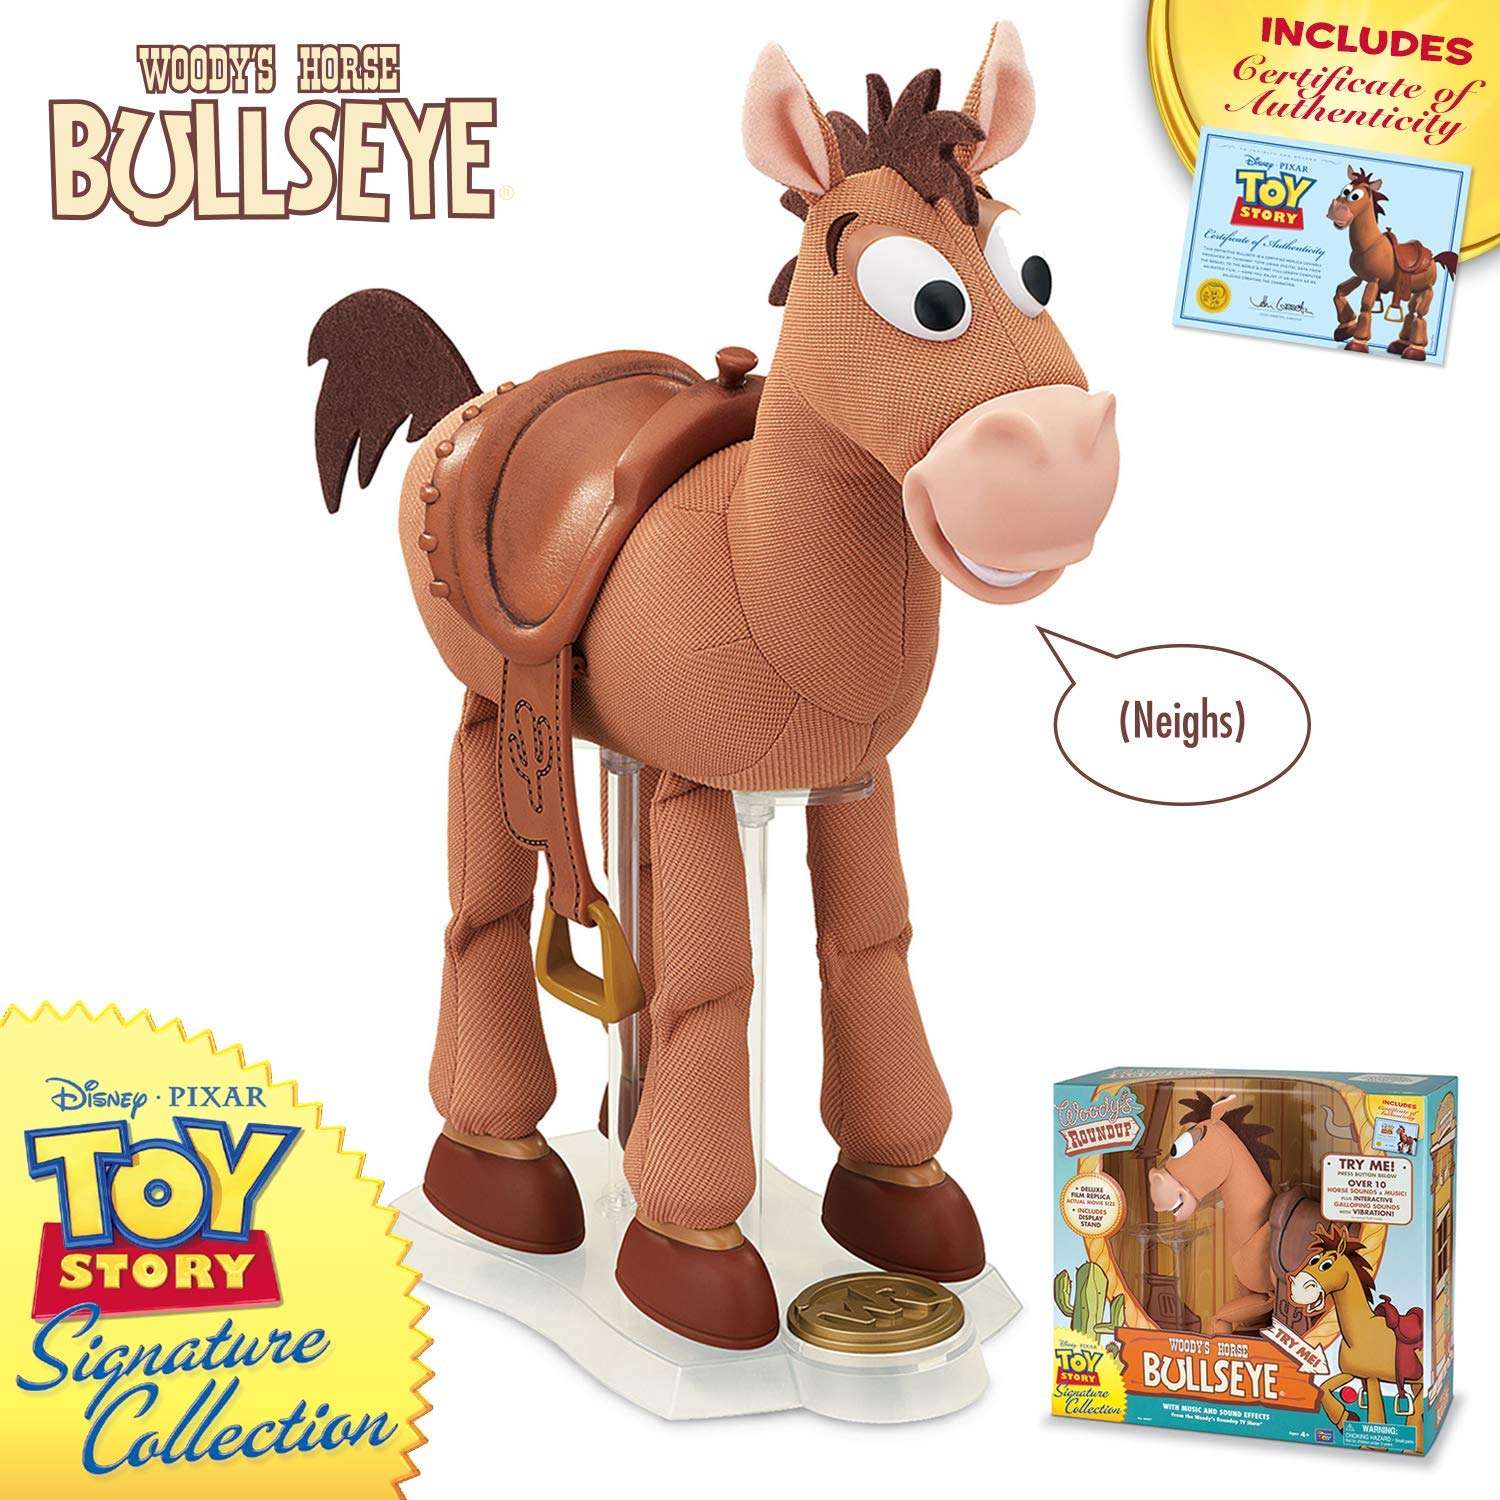 Toy Story Signature Collection Woody's Horse Bullseye Deluxe Film Replica NEW!